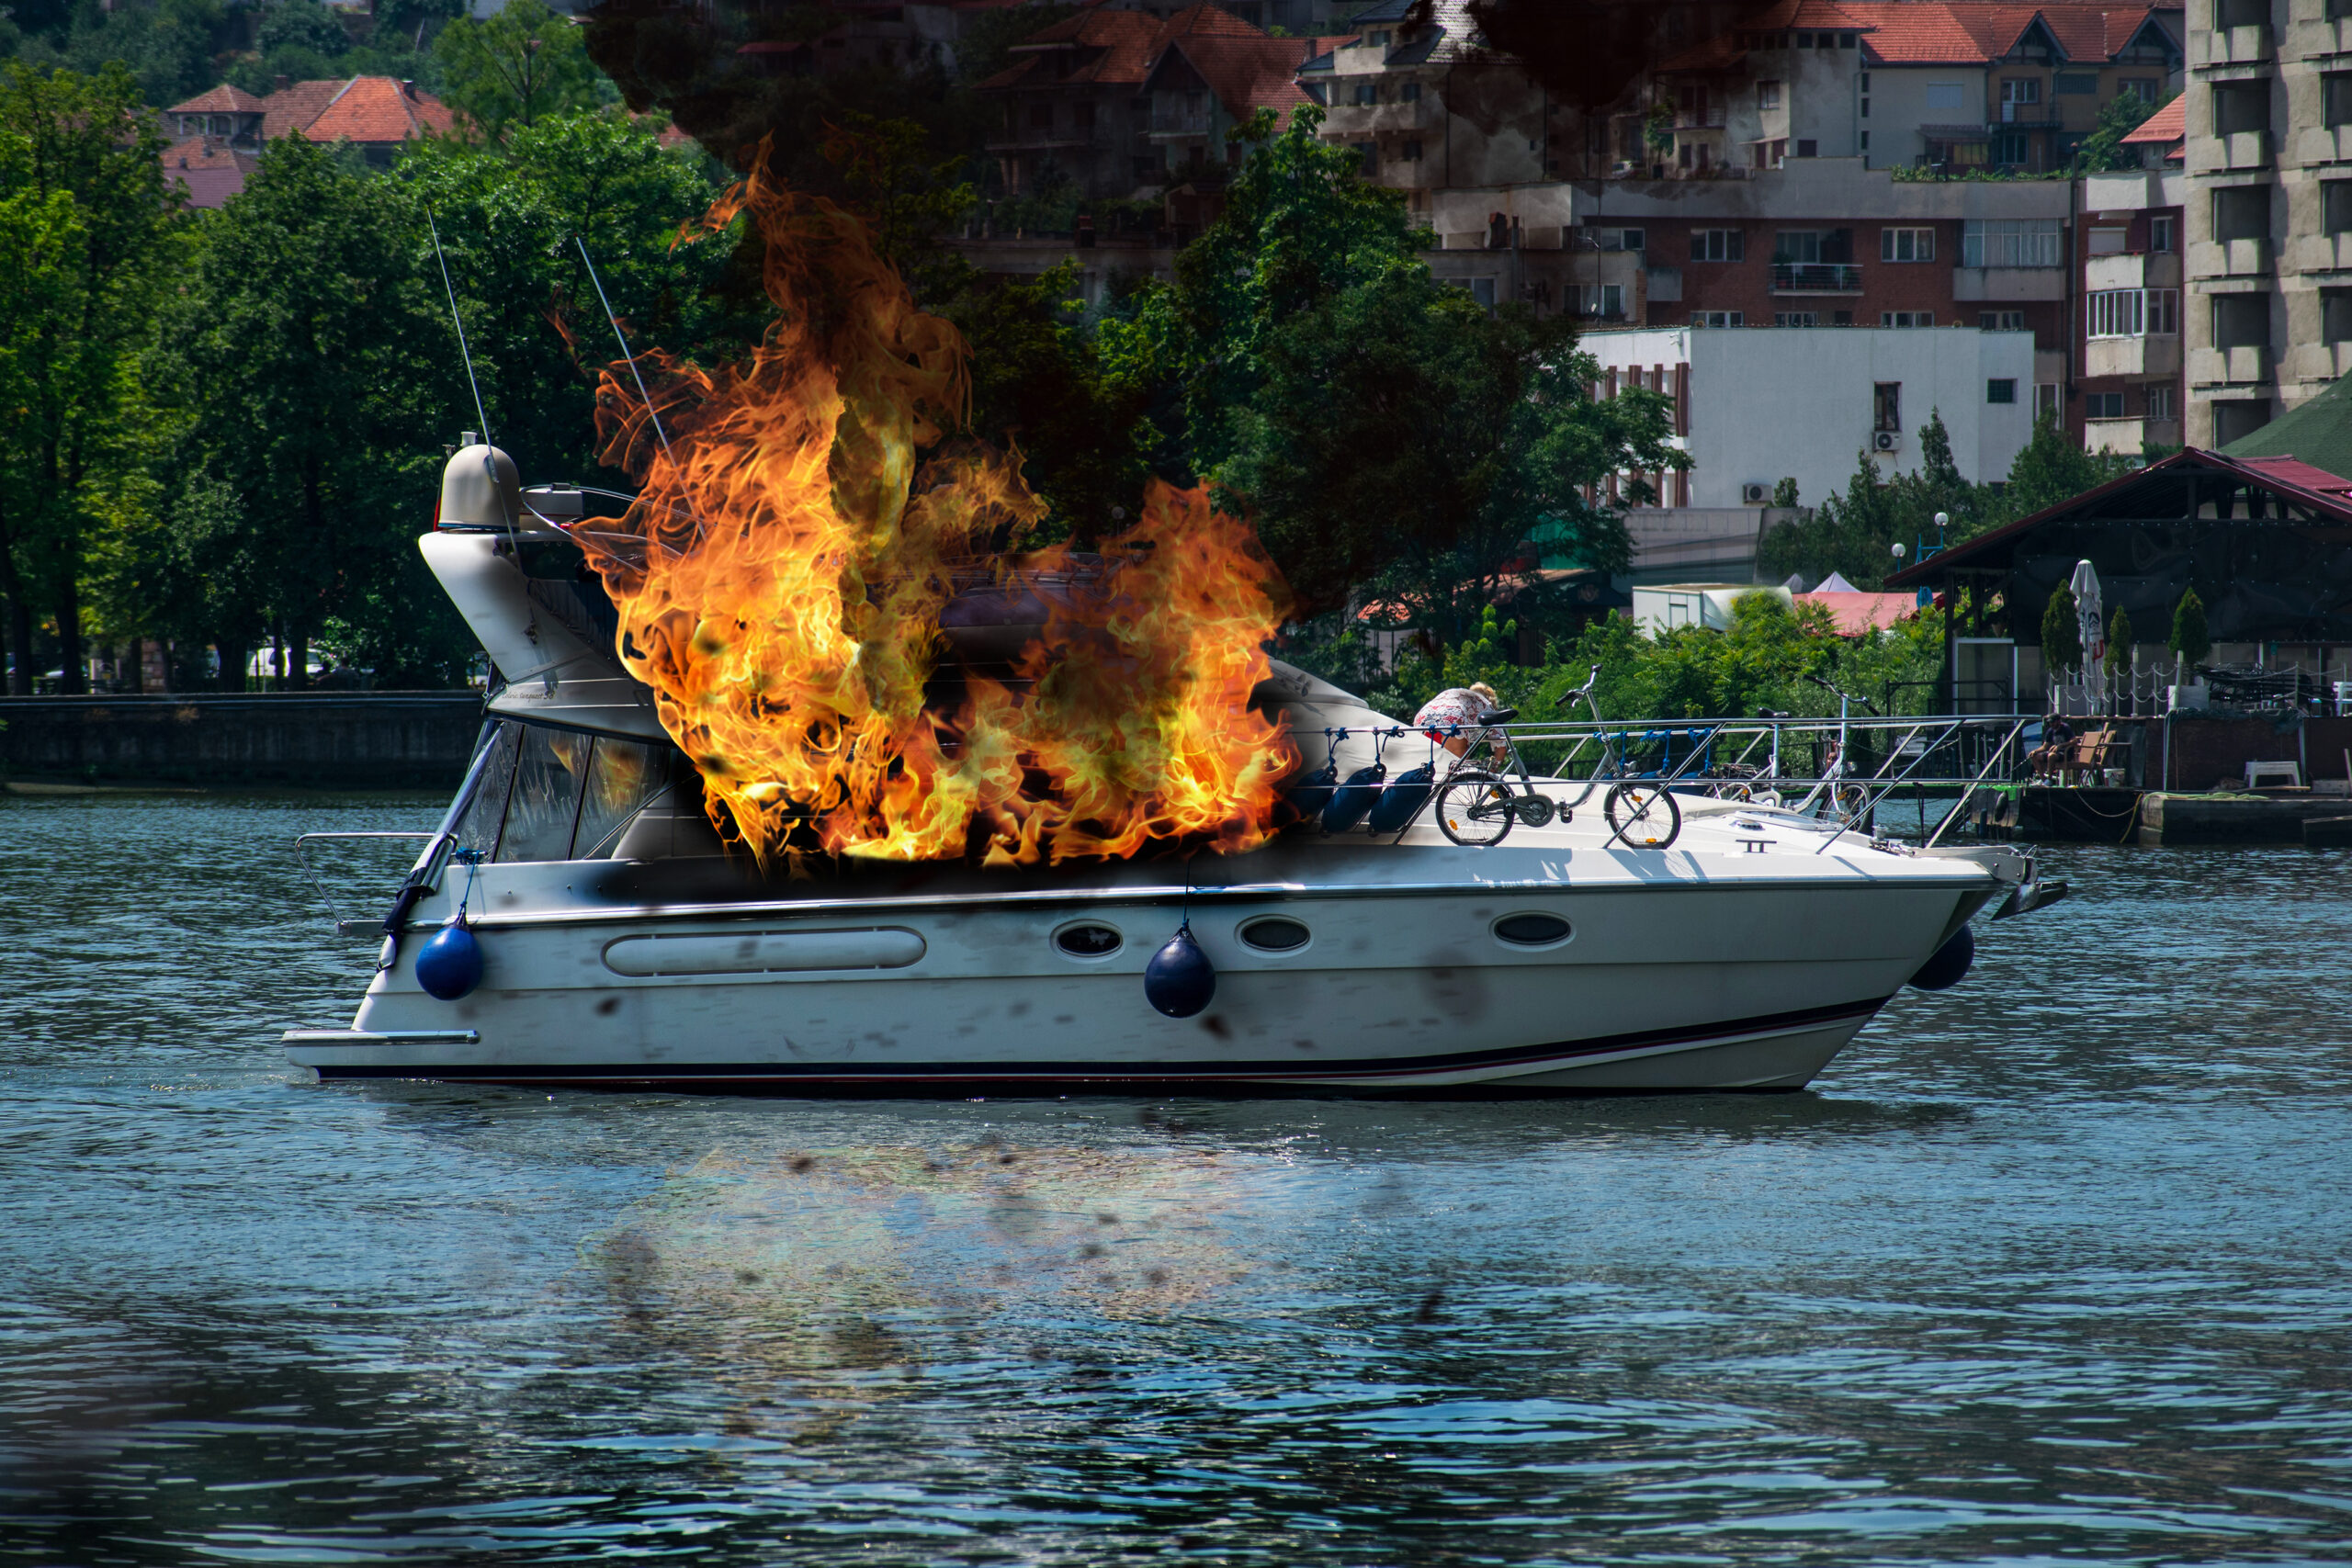 Automatic Fire Protection Systems And Why They Are Needed For Boats